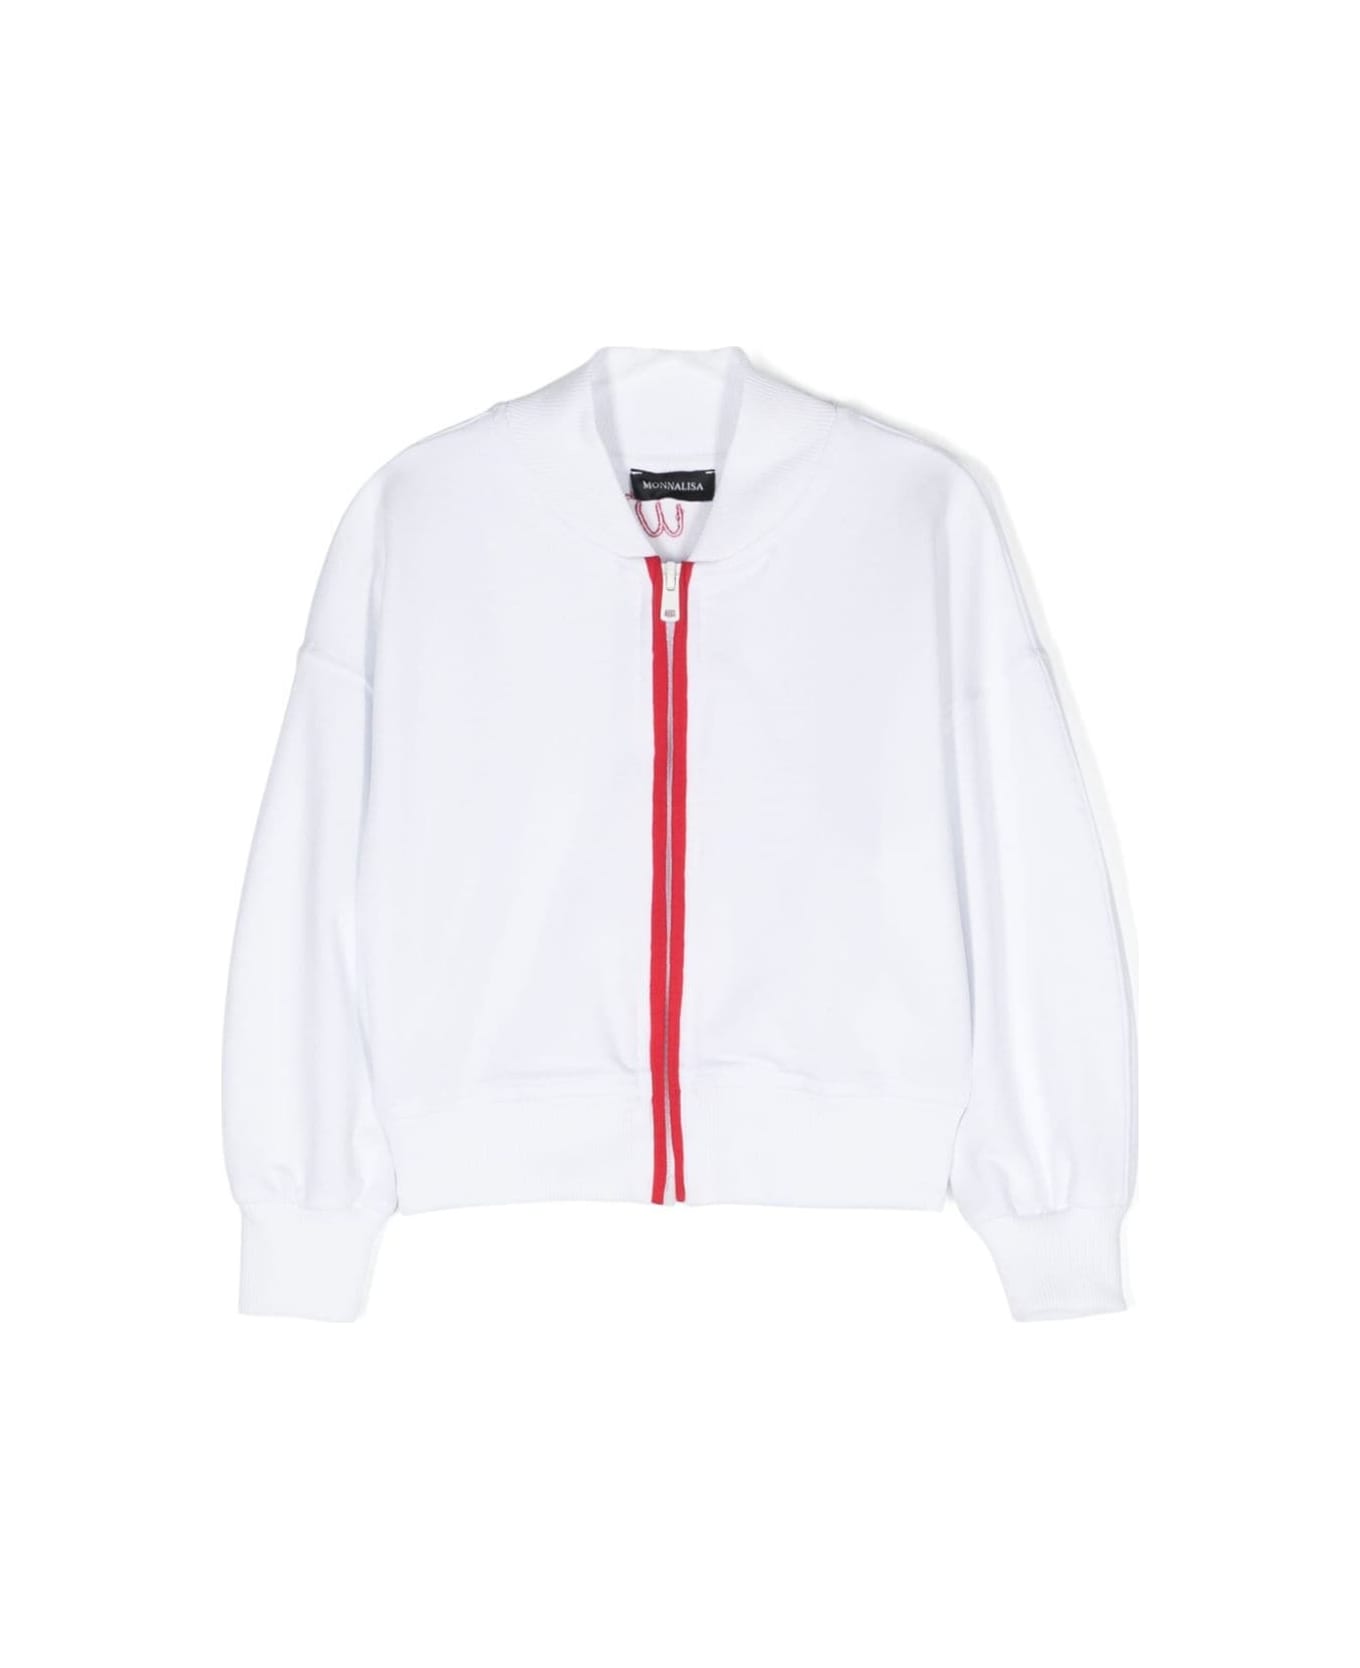 Monnalisa White Sweatshirt With Strawberry Detail At The Back In Stretch Cotton Girl - White